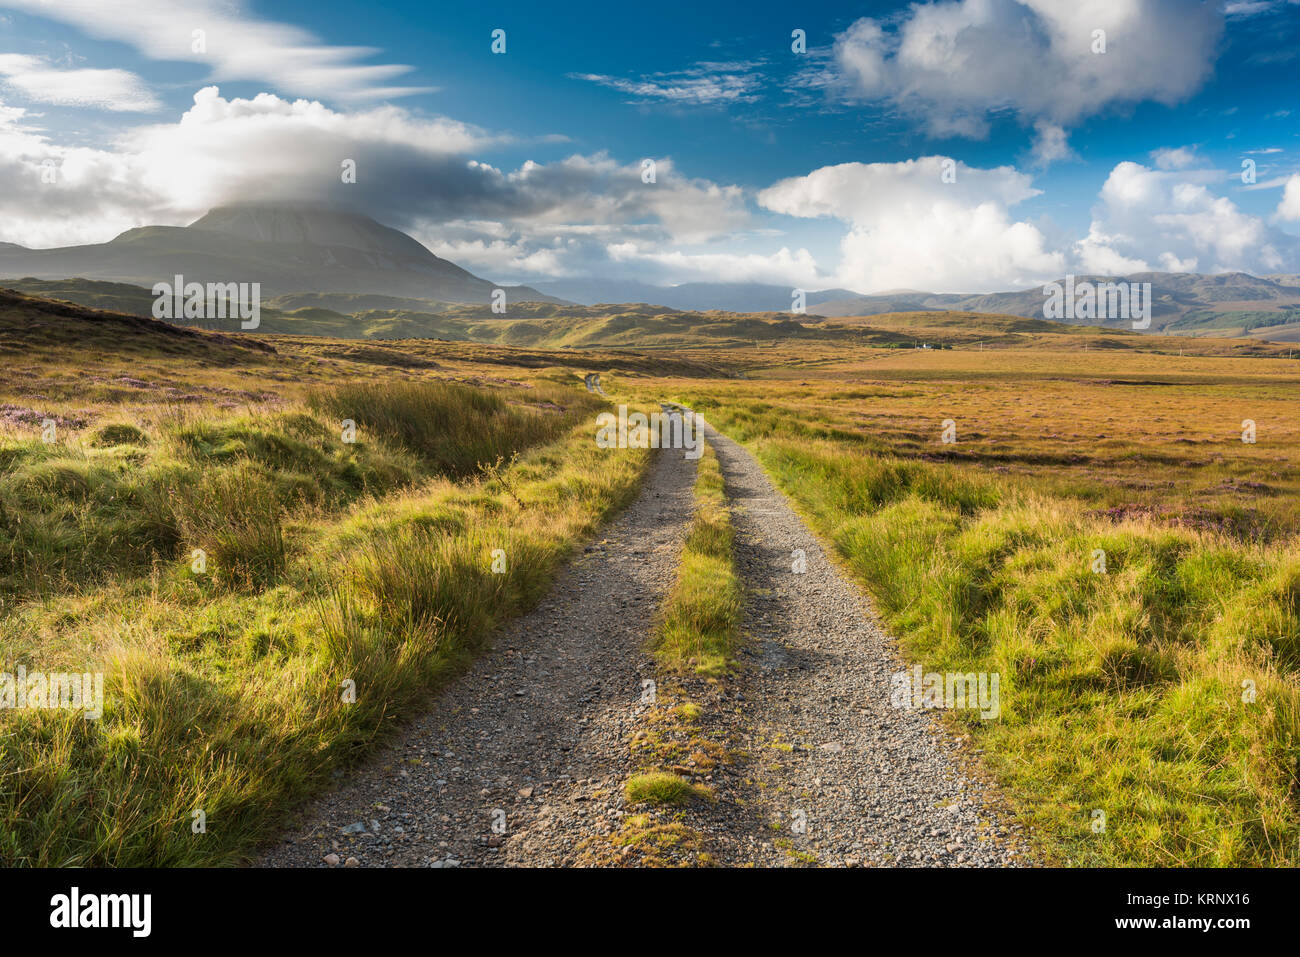 Looking towards Mount Errigal, one of Ireland's most iconic mountains, along a track in bogland near Gort an Choirce, County Donegal, Ireland Stock Photo